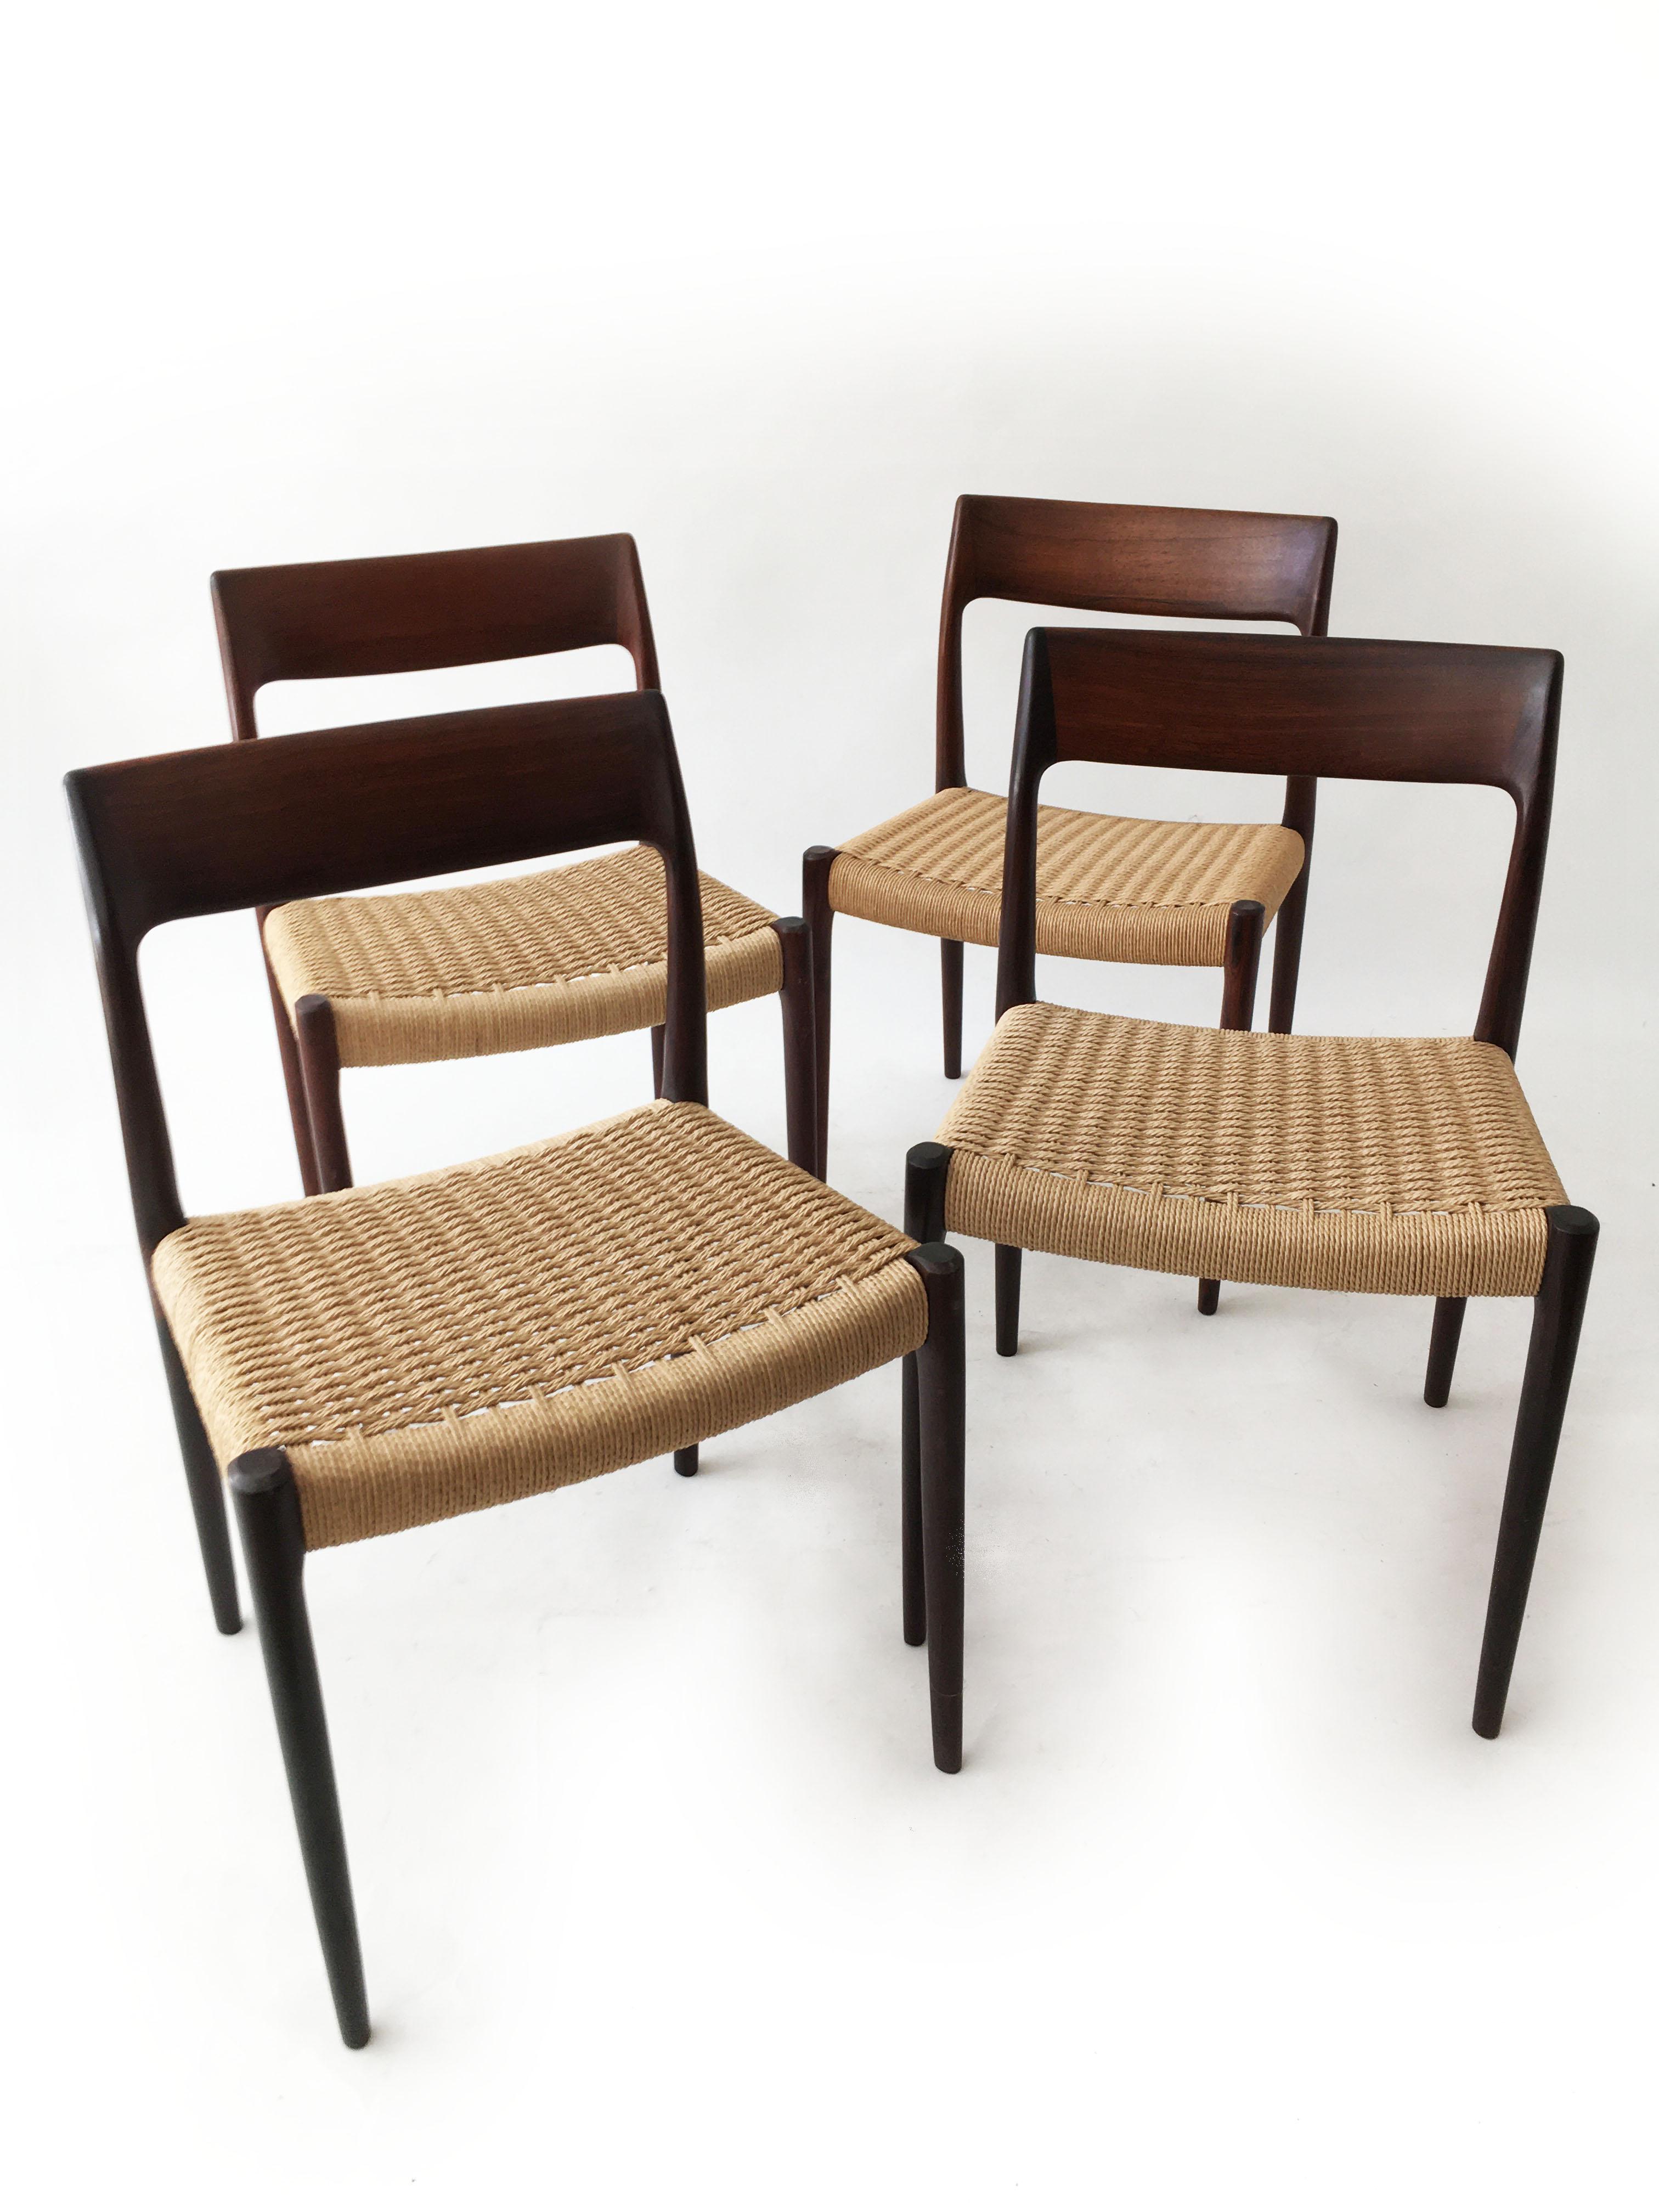 Wonderful vintage Niels Otto Møller, model 77 set of four modern Danish dining chairs, Denmark, 1958. The chairs retain the original paper cord in very good condition. A truly Classic midcentury Danish design to upgrade any room. Signed with Danish